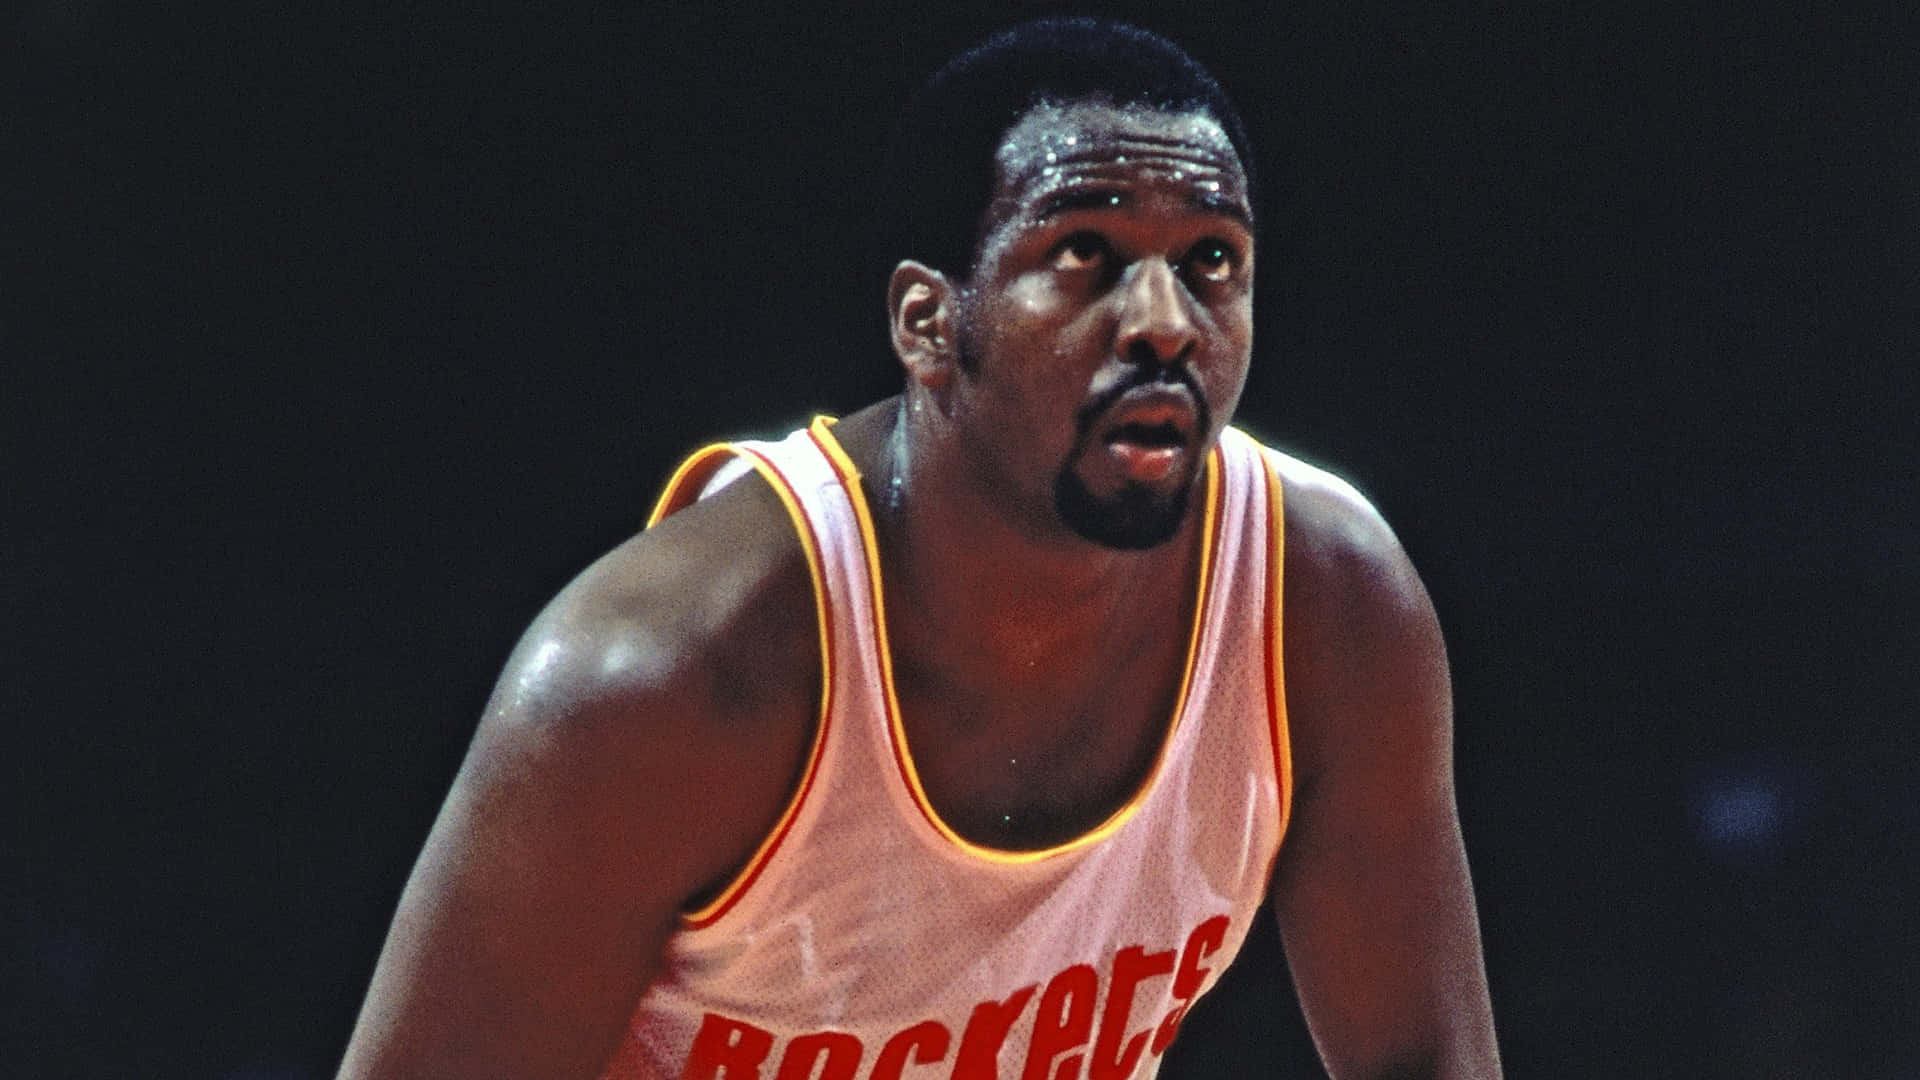 Best Athlete Moses Malone Wallpaper